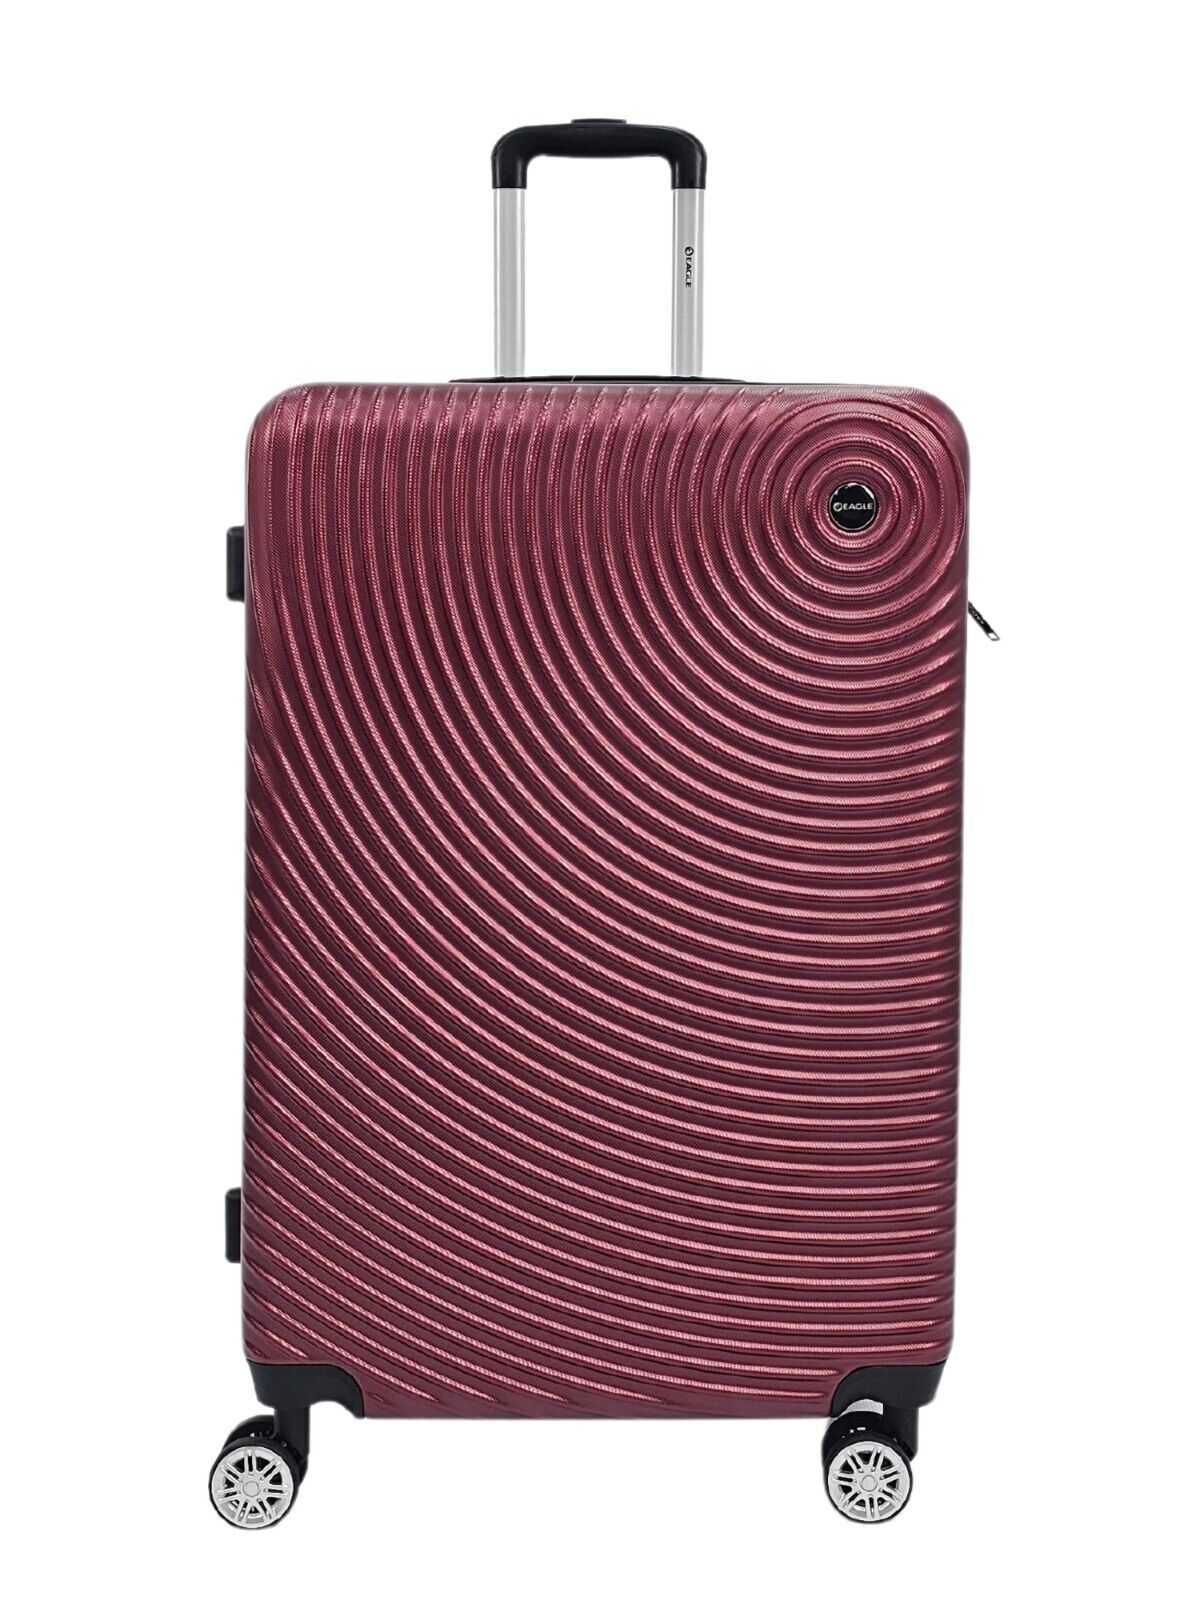 Brookside Large Hard Shell Suitcase in Burgundy